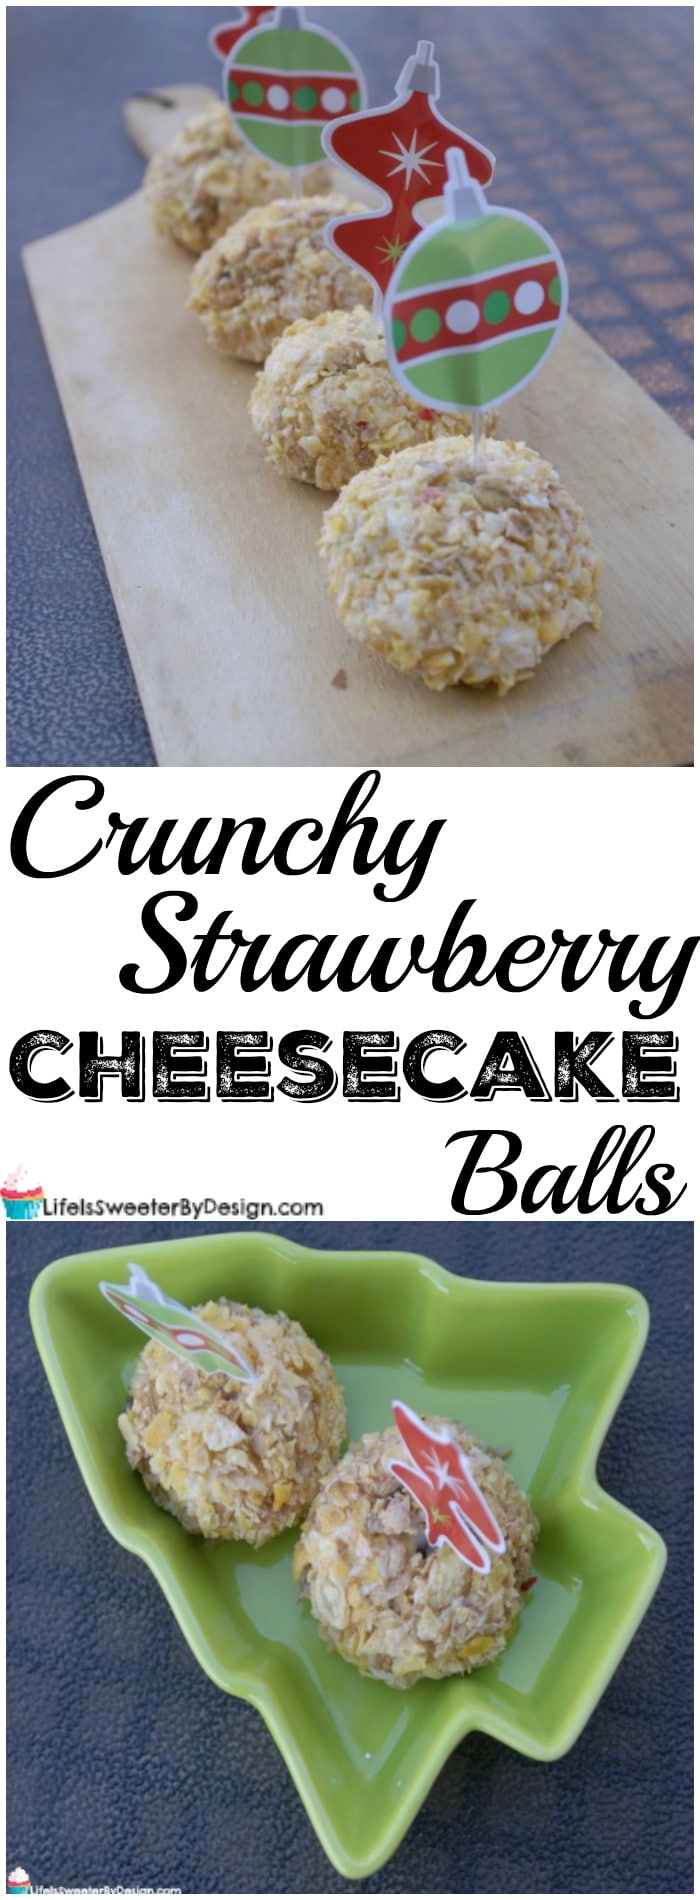 Crunchy Strawberry Cheesecake Balls are a great finger food or dessert for your next party! Sweet with just the right amount of crunch! This no bake dessert is easy to make too!